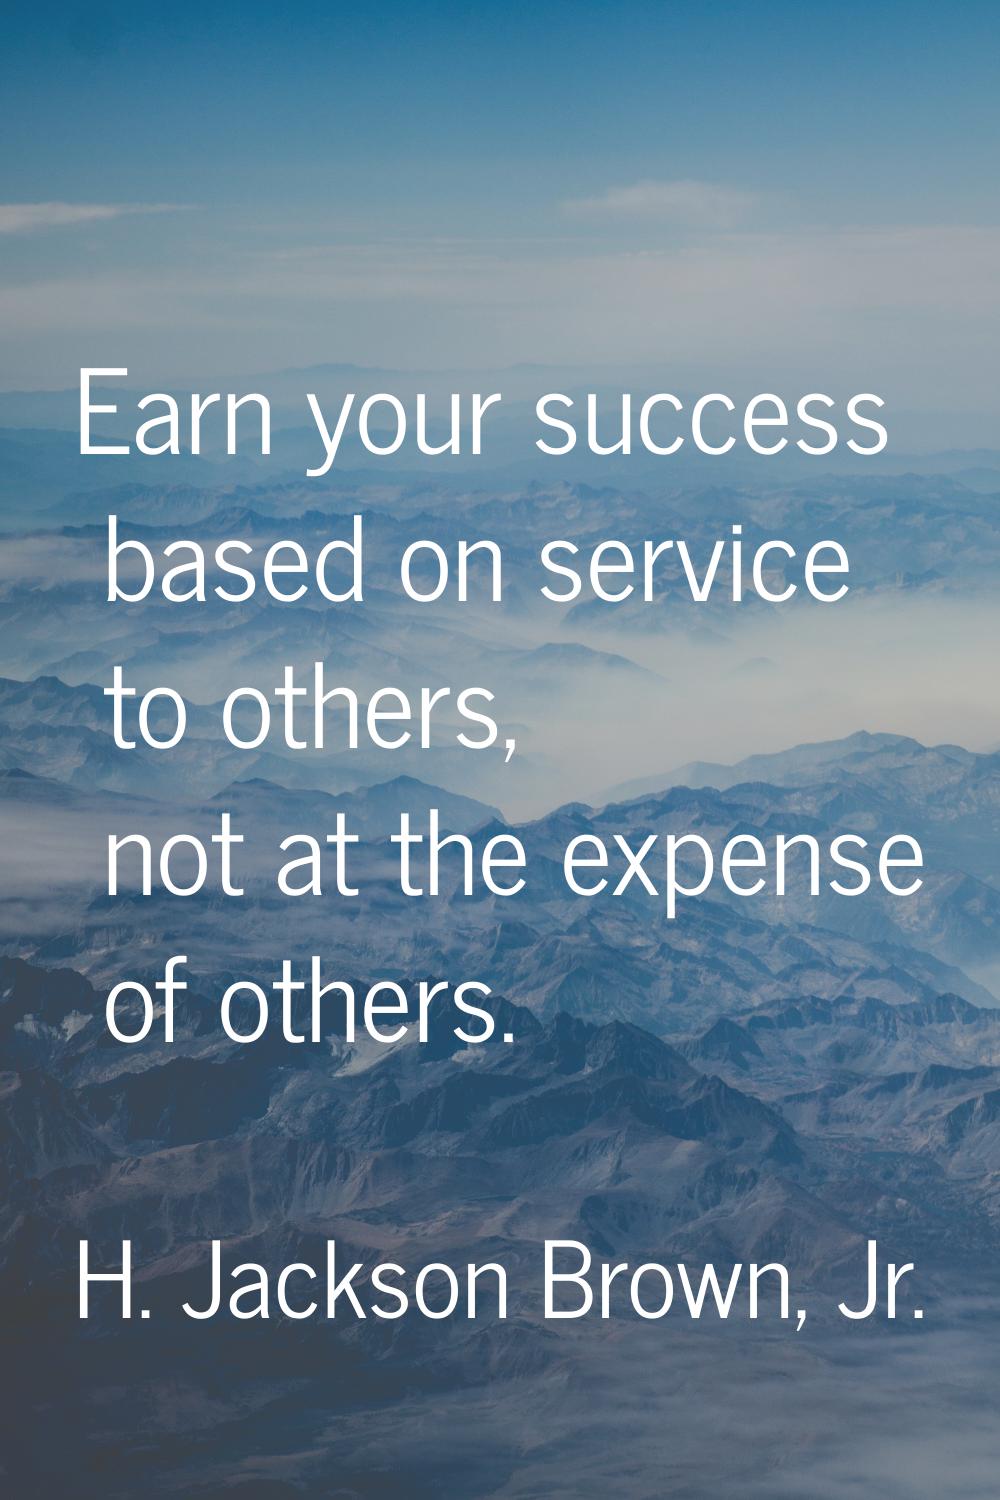 Earn your success based on service to others, not at the expense of others.